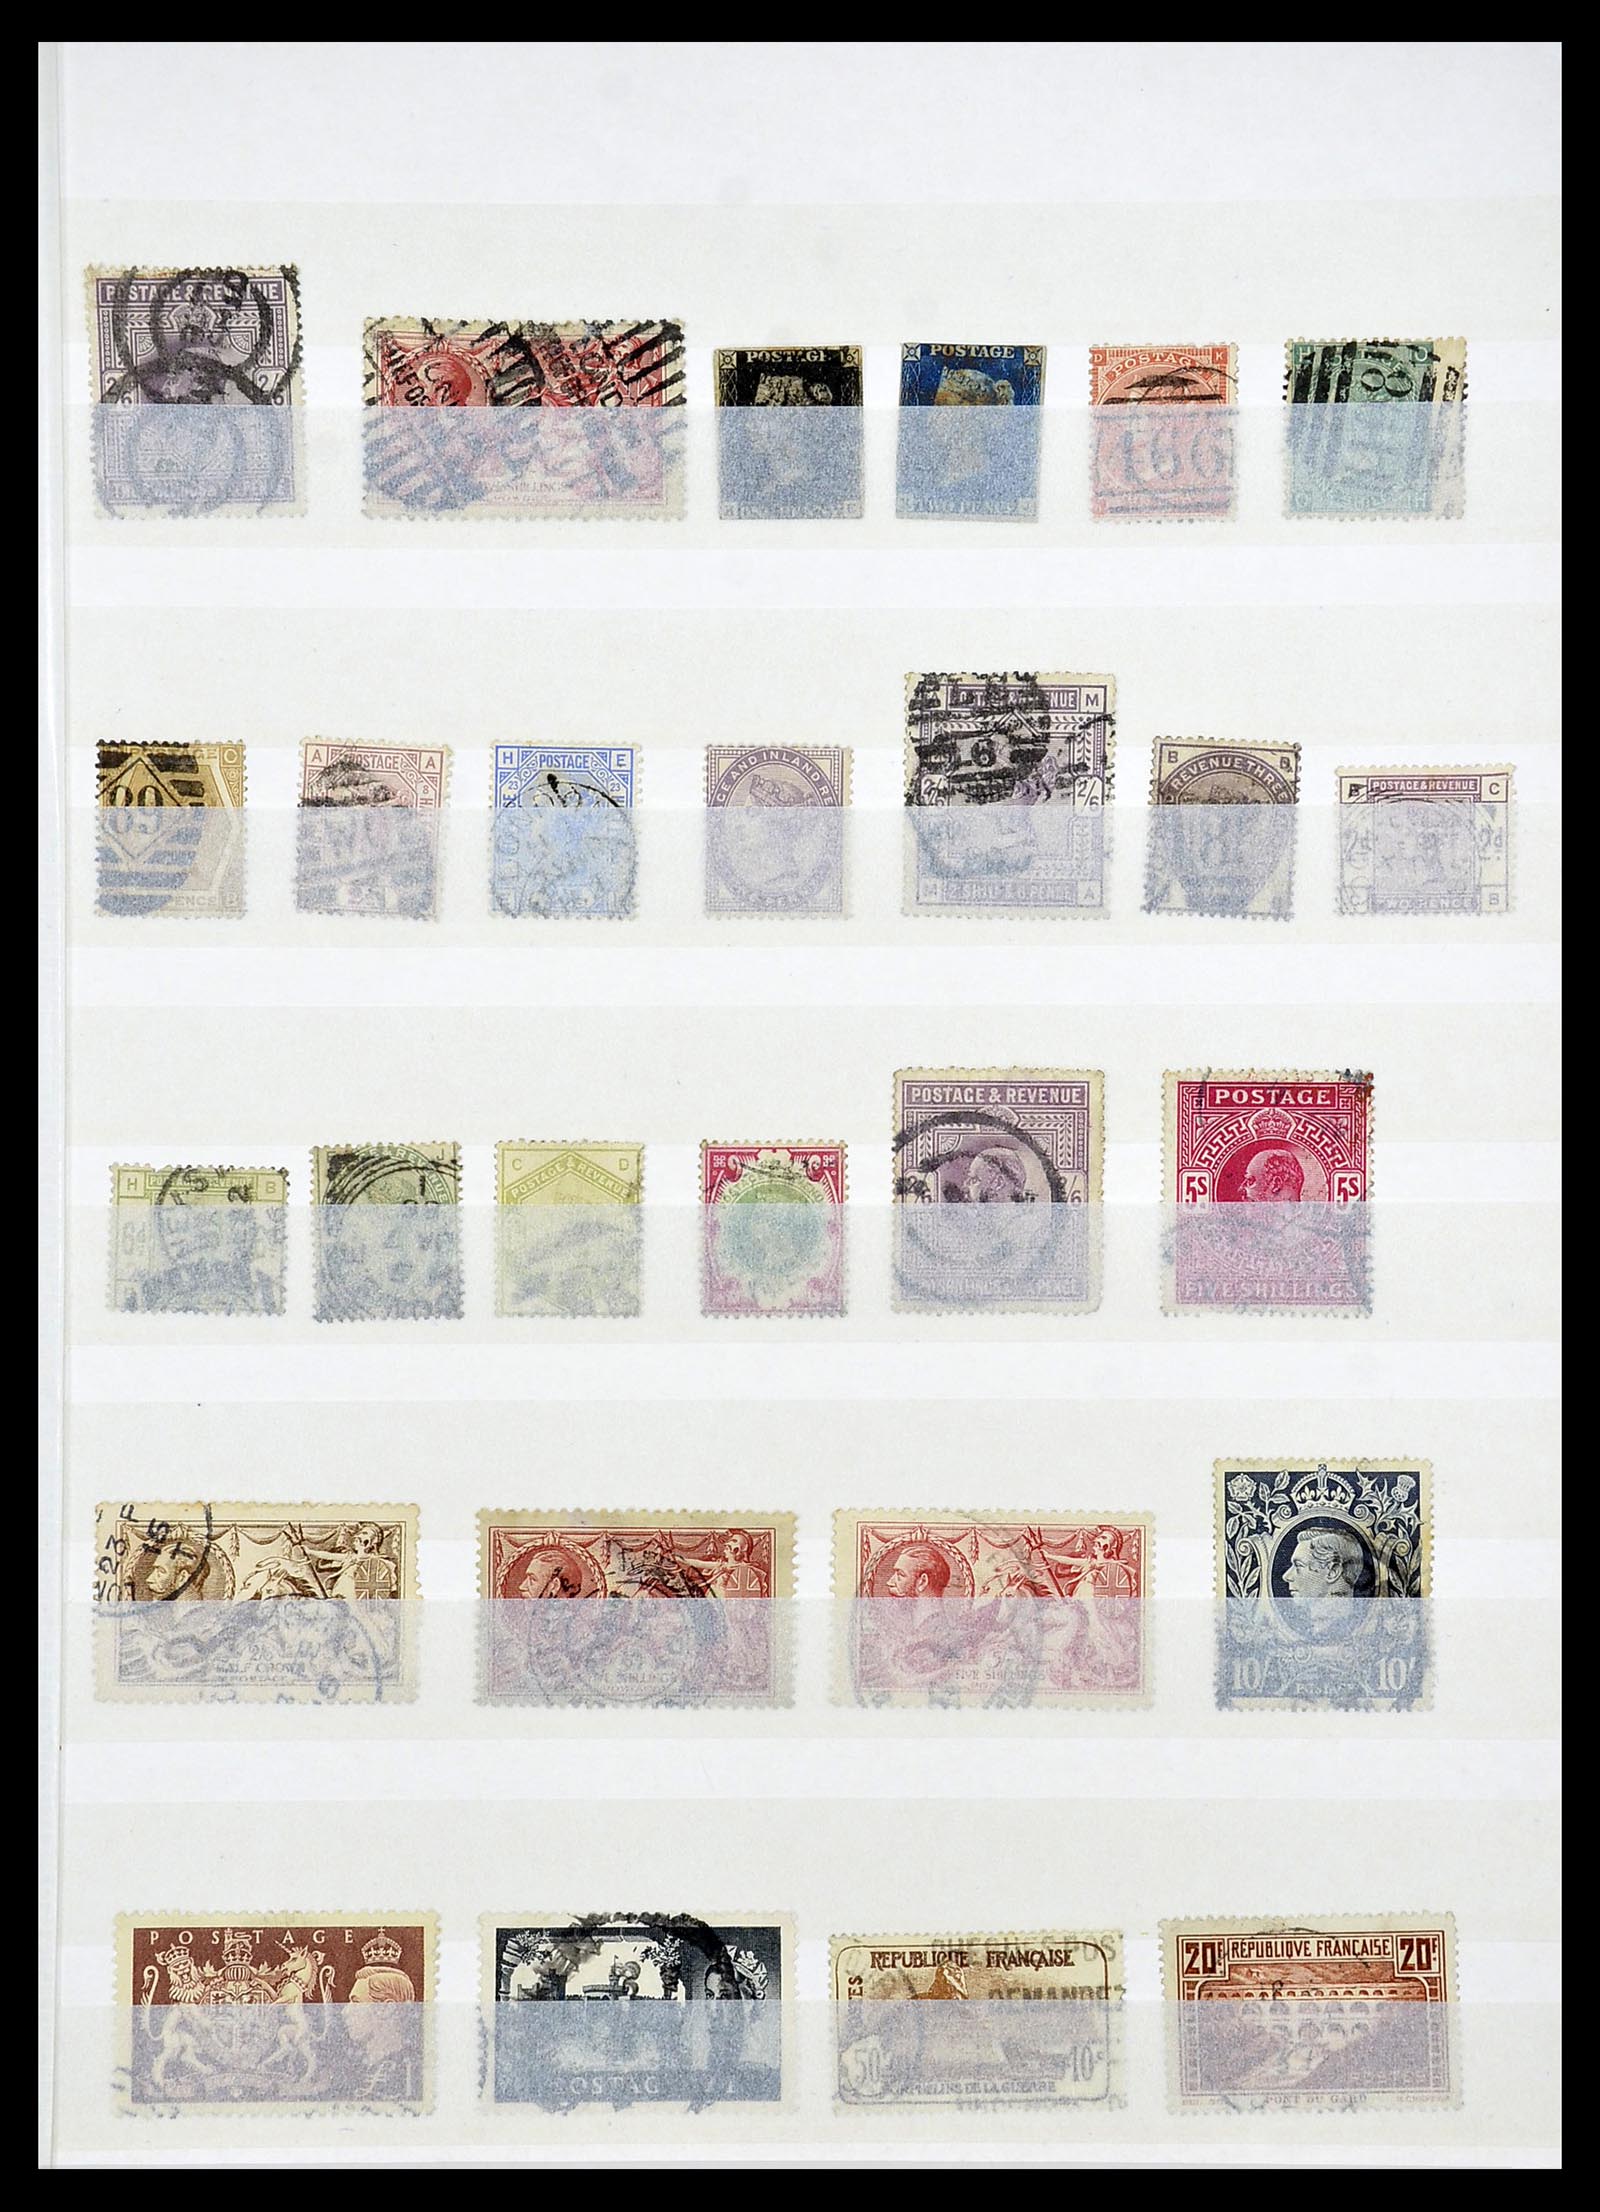 34263 023 - Stamp collection 34263 European countries key stamps 1840-1950.